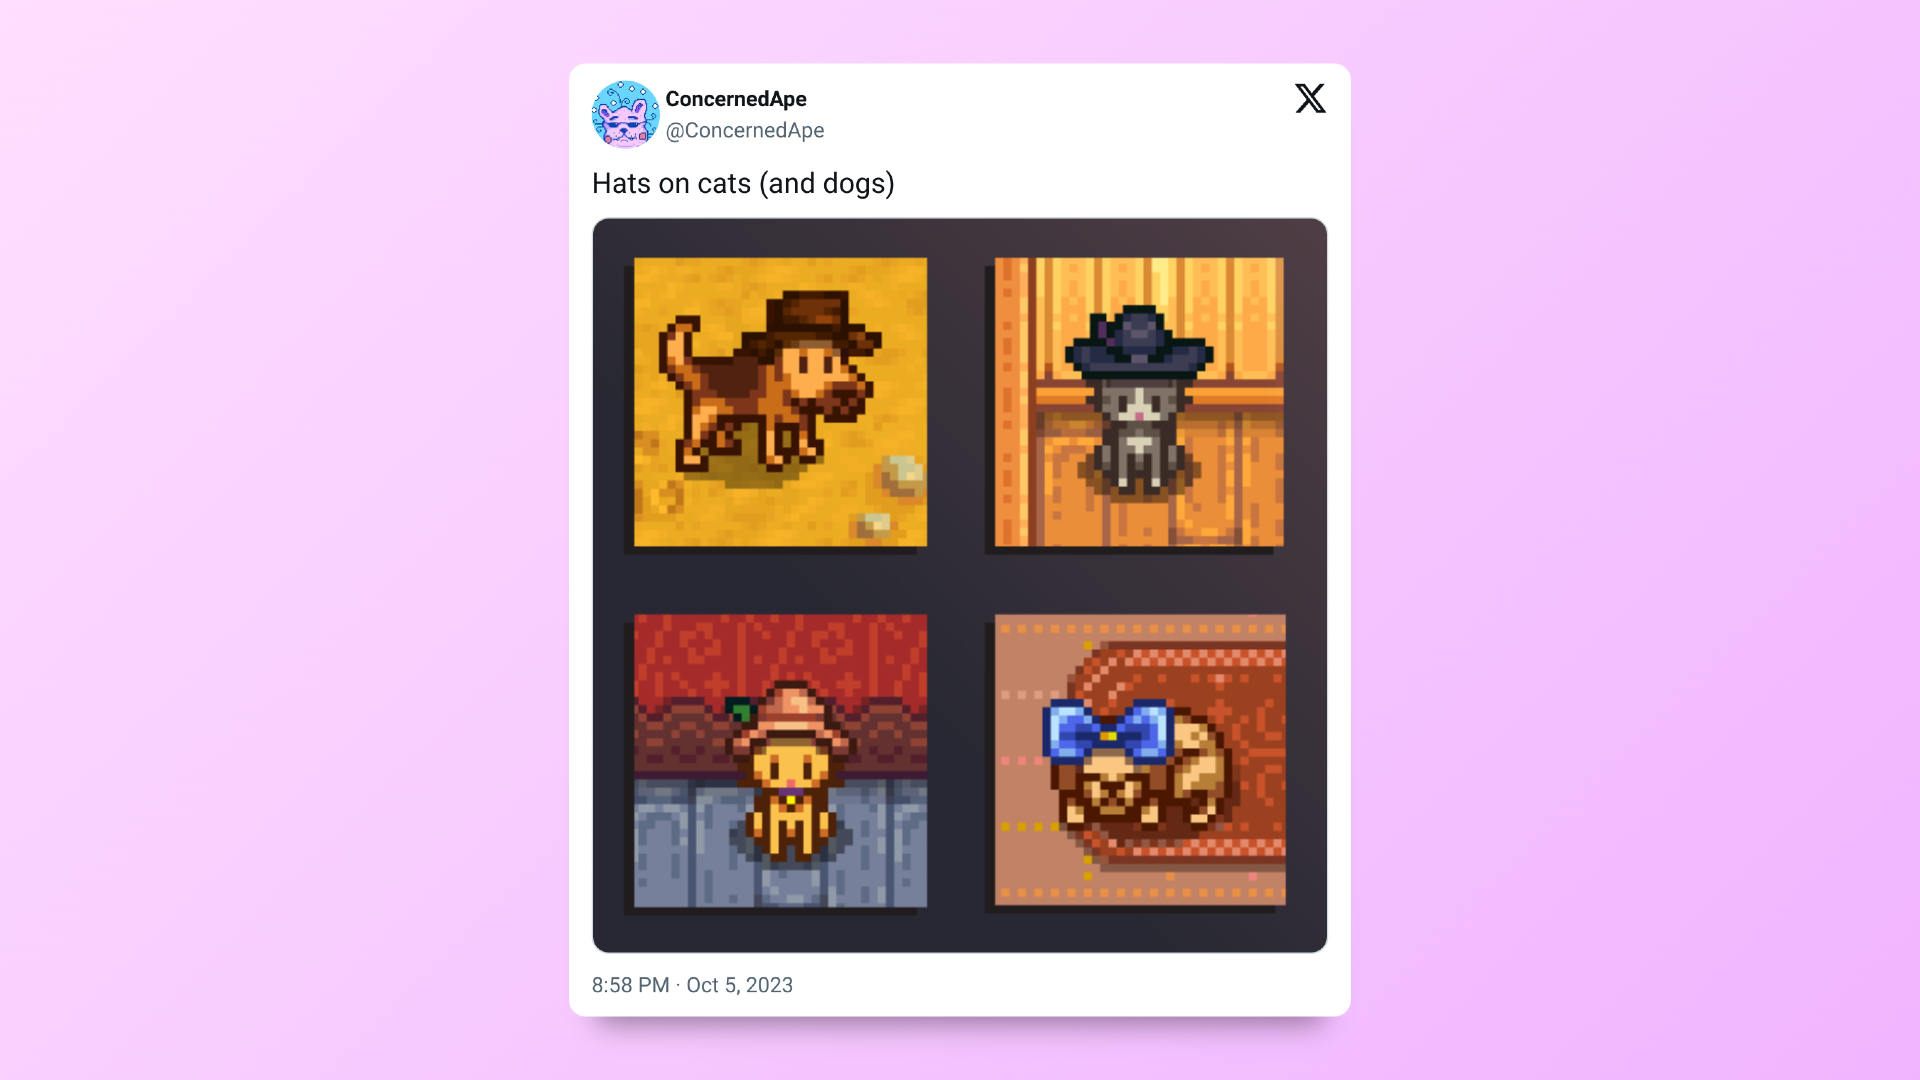 ConcernedApe's post teasing Stardew Valley's 1.6 update, specifically hats on pets